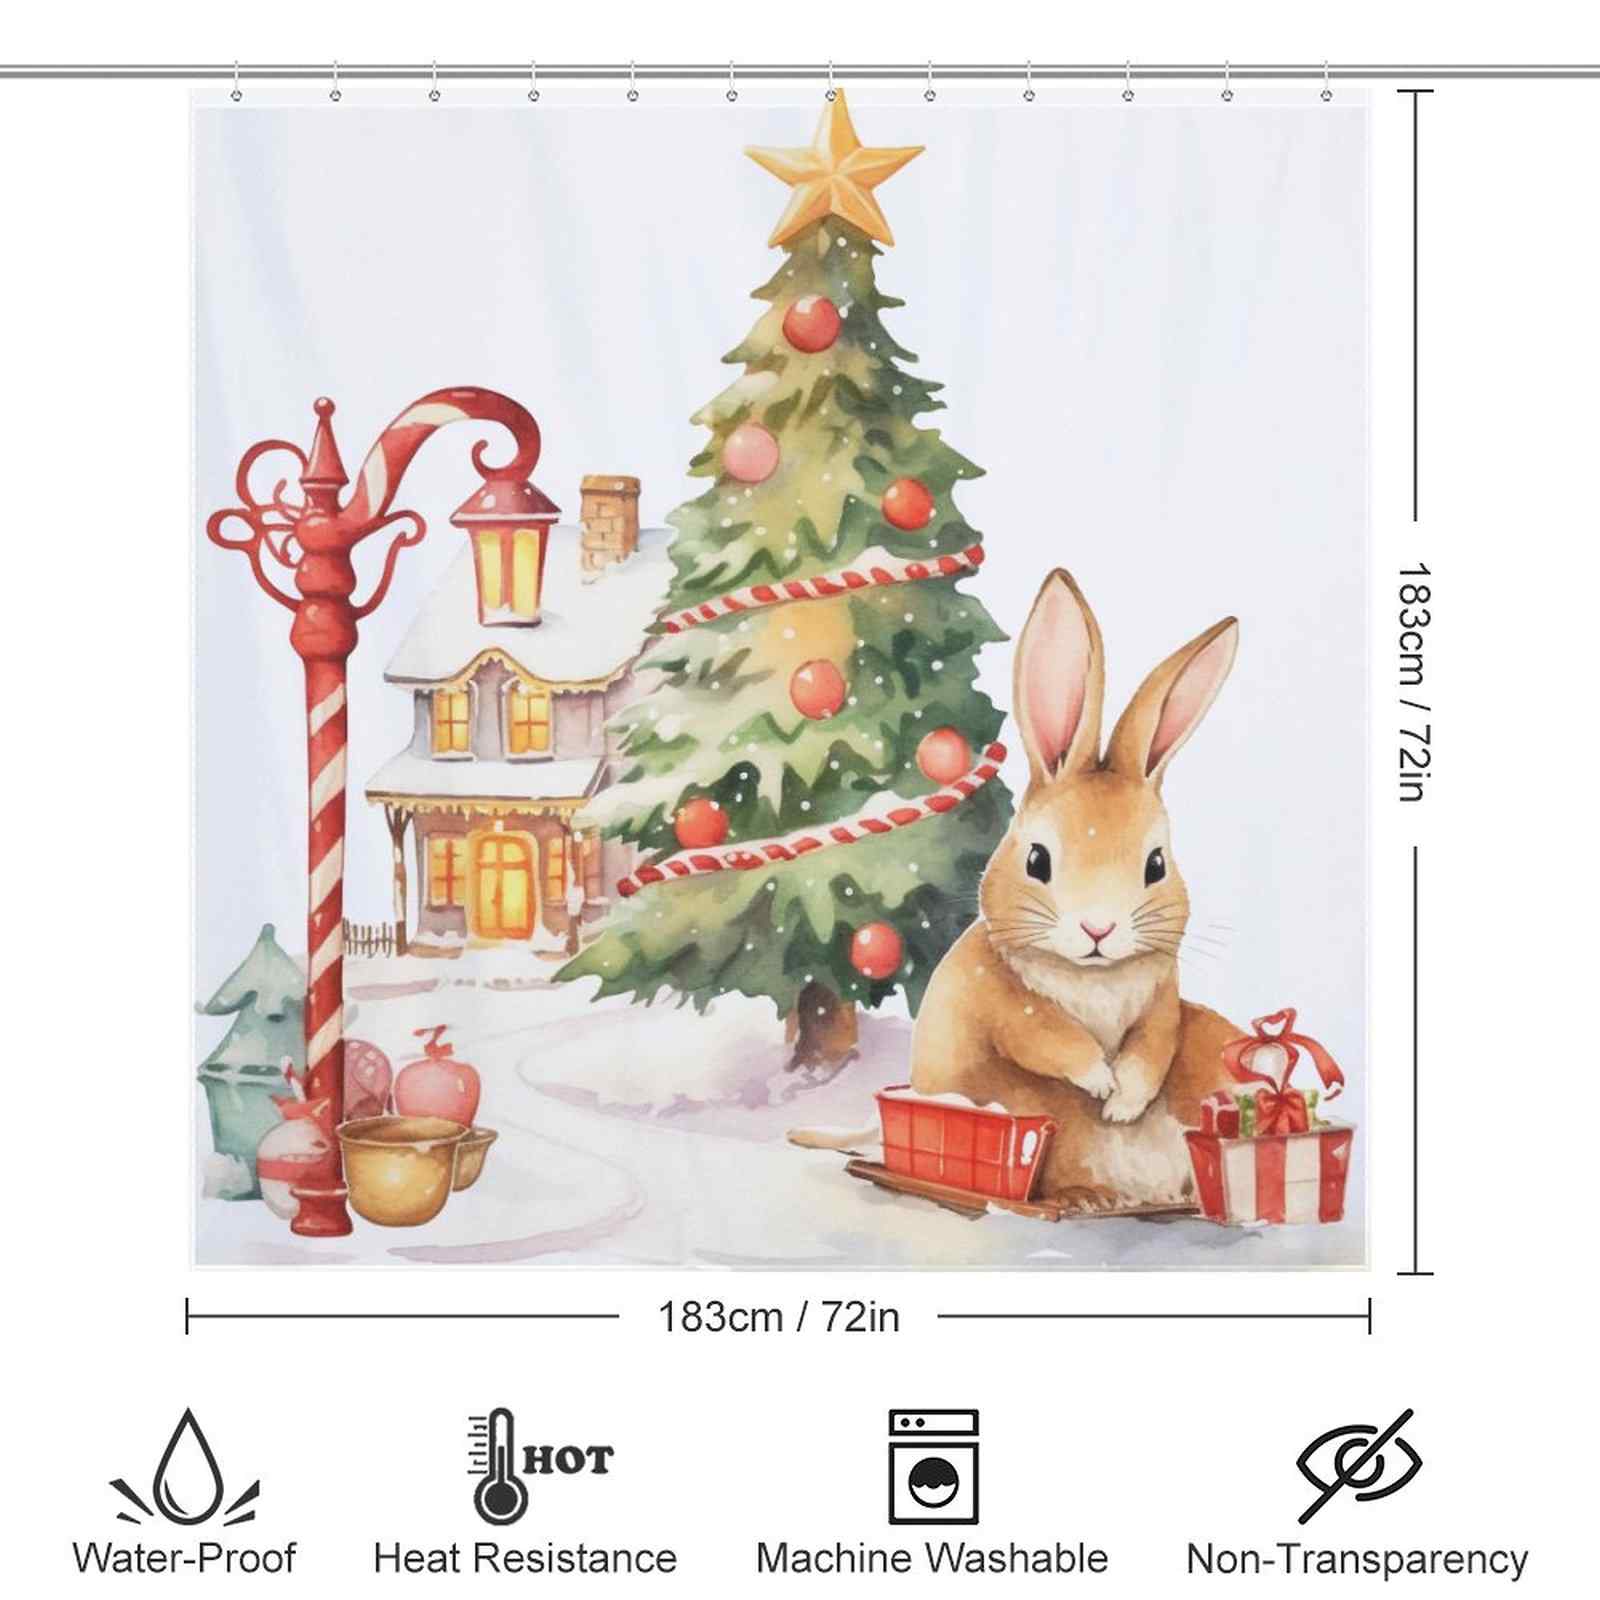 This festive Cute Rabbit Tree Christmas Shower Curtain from Cotton Cat features a charming bunny and a beautifully adorned Christmas tree, perfect for adding holiday cheer to your bathroom decor.